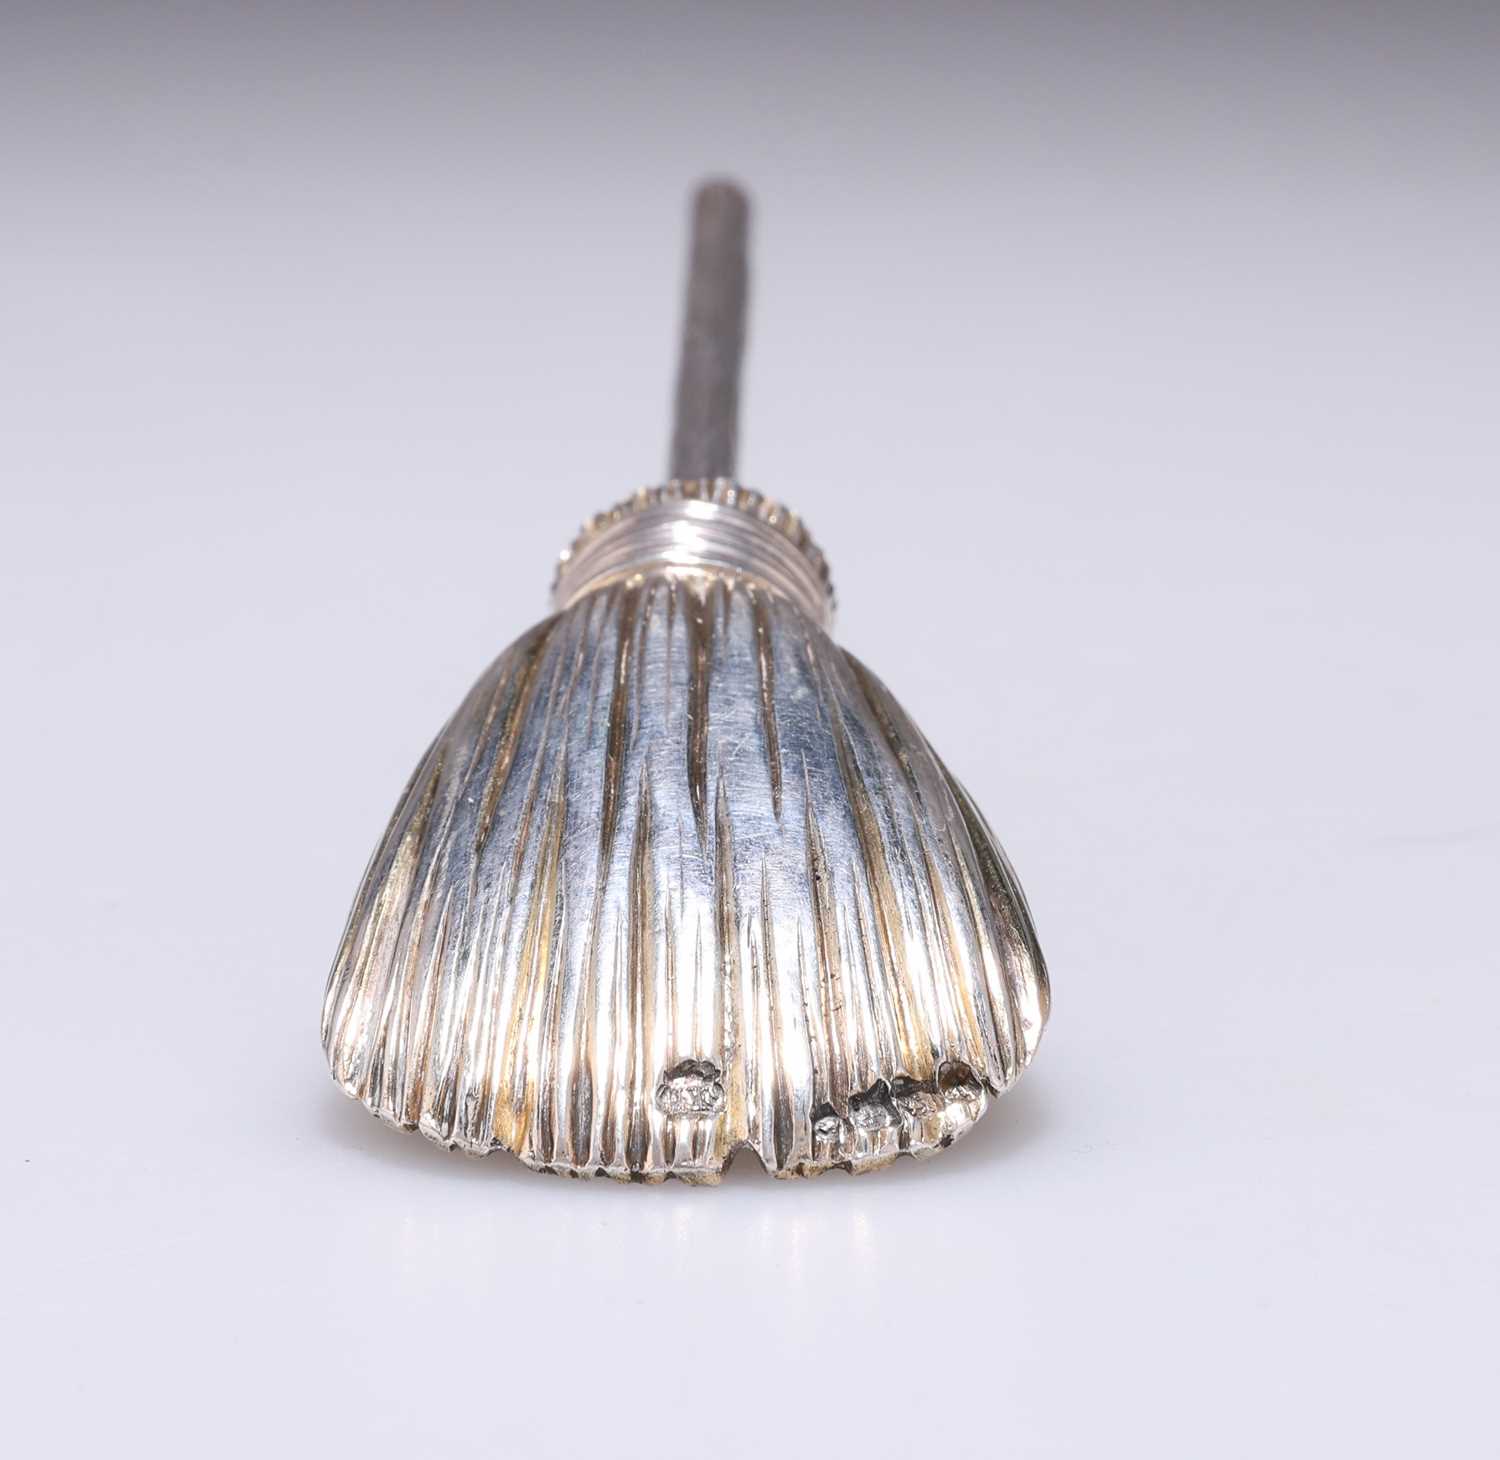 A VICTORIAN SILVER NOVELTY SPOON - Image 3 of 3